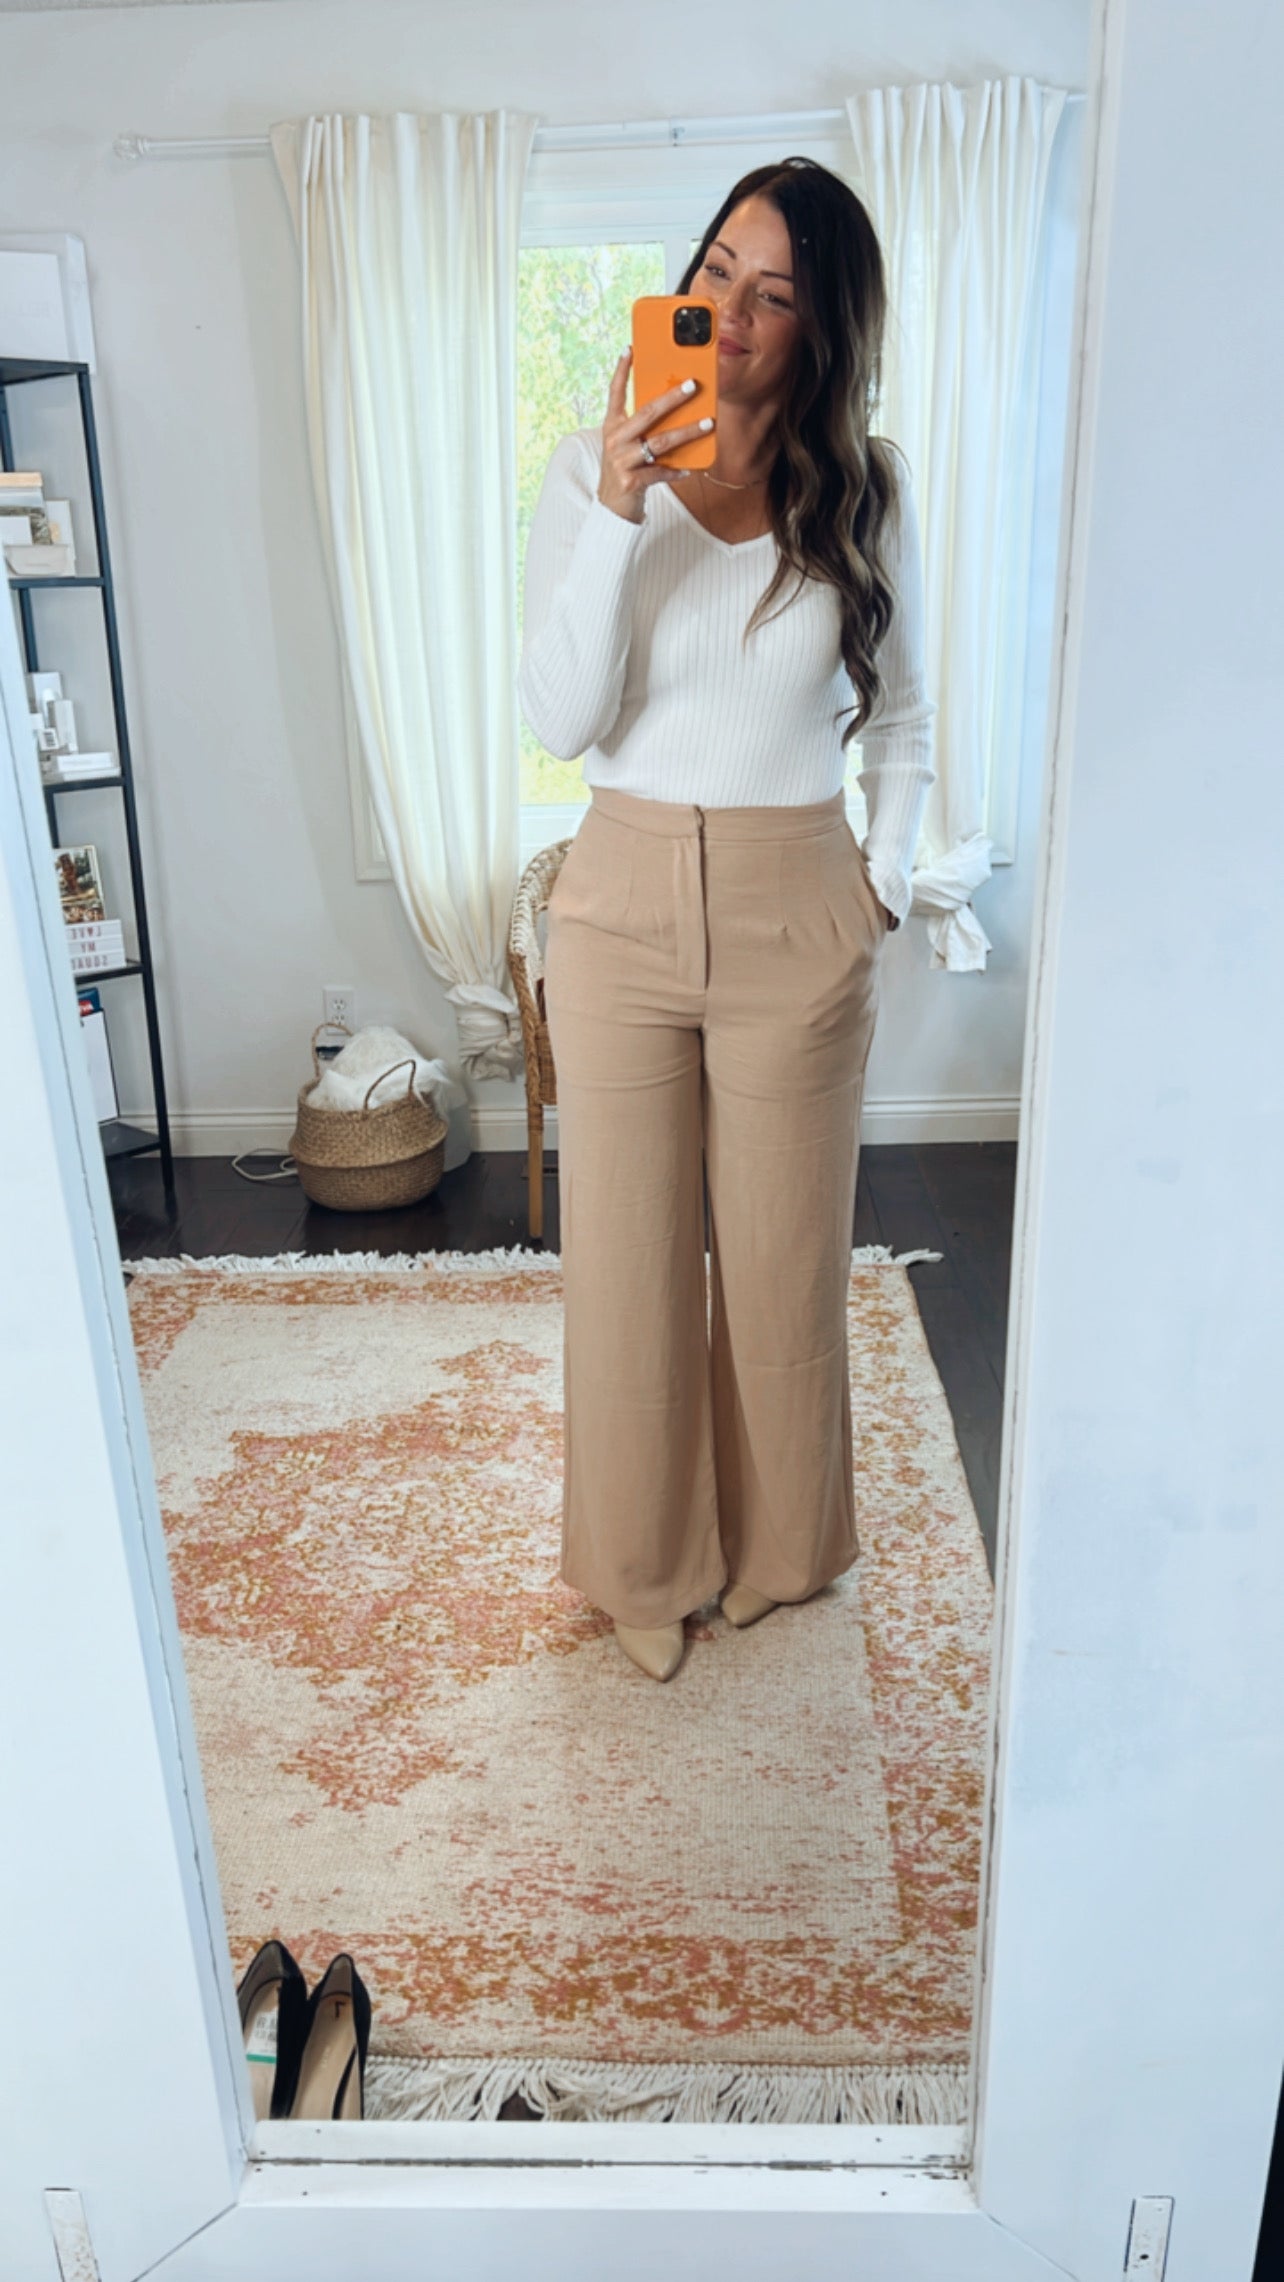 Brittani crinkled high waisted trousers – Sisters On Trend Boutique